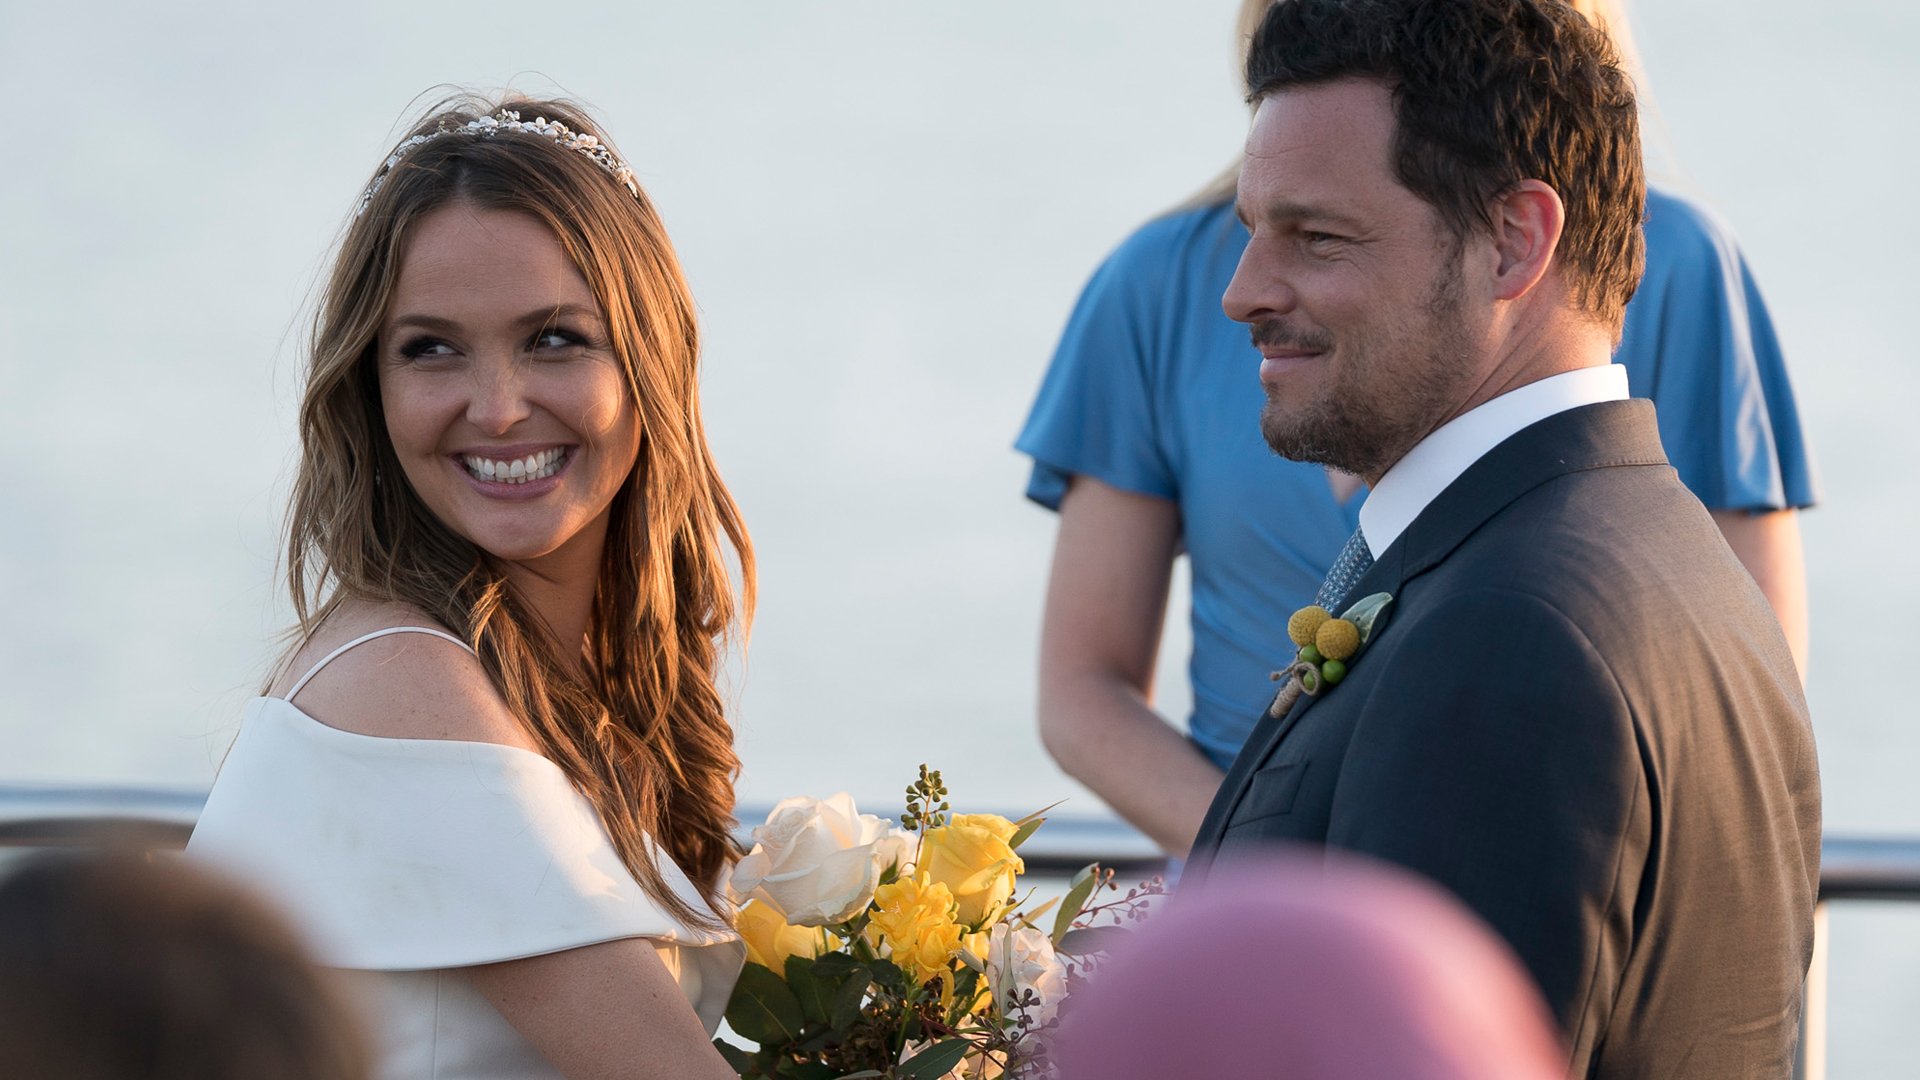 Camilla Luddington as Jo Wilson and Justin Chambers as Alex Karev get married on a boat in ‘Grey’s Anatomy’ Season 14